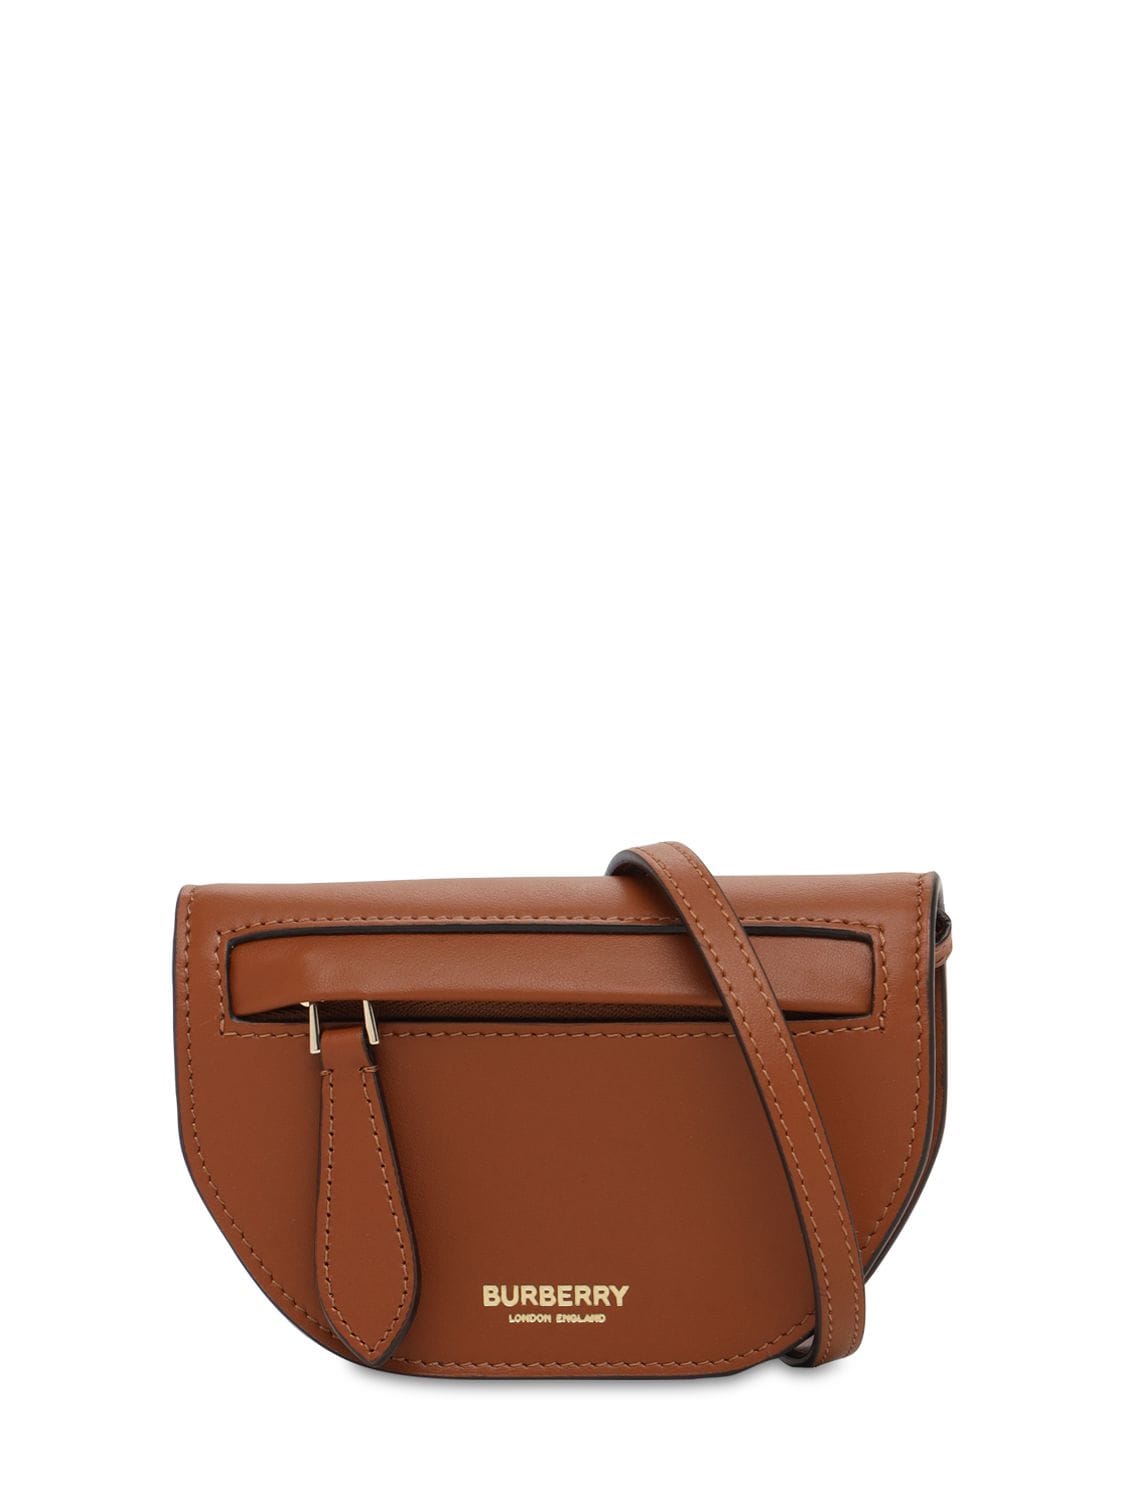 Burberry Micro Olympia Leather Shoulder Bag In Tan | ModeSens